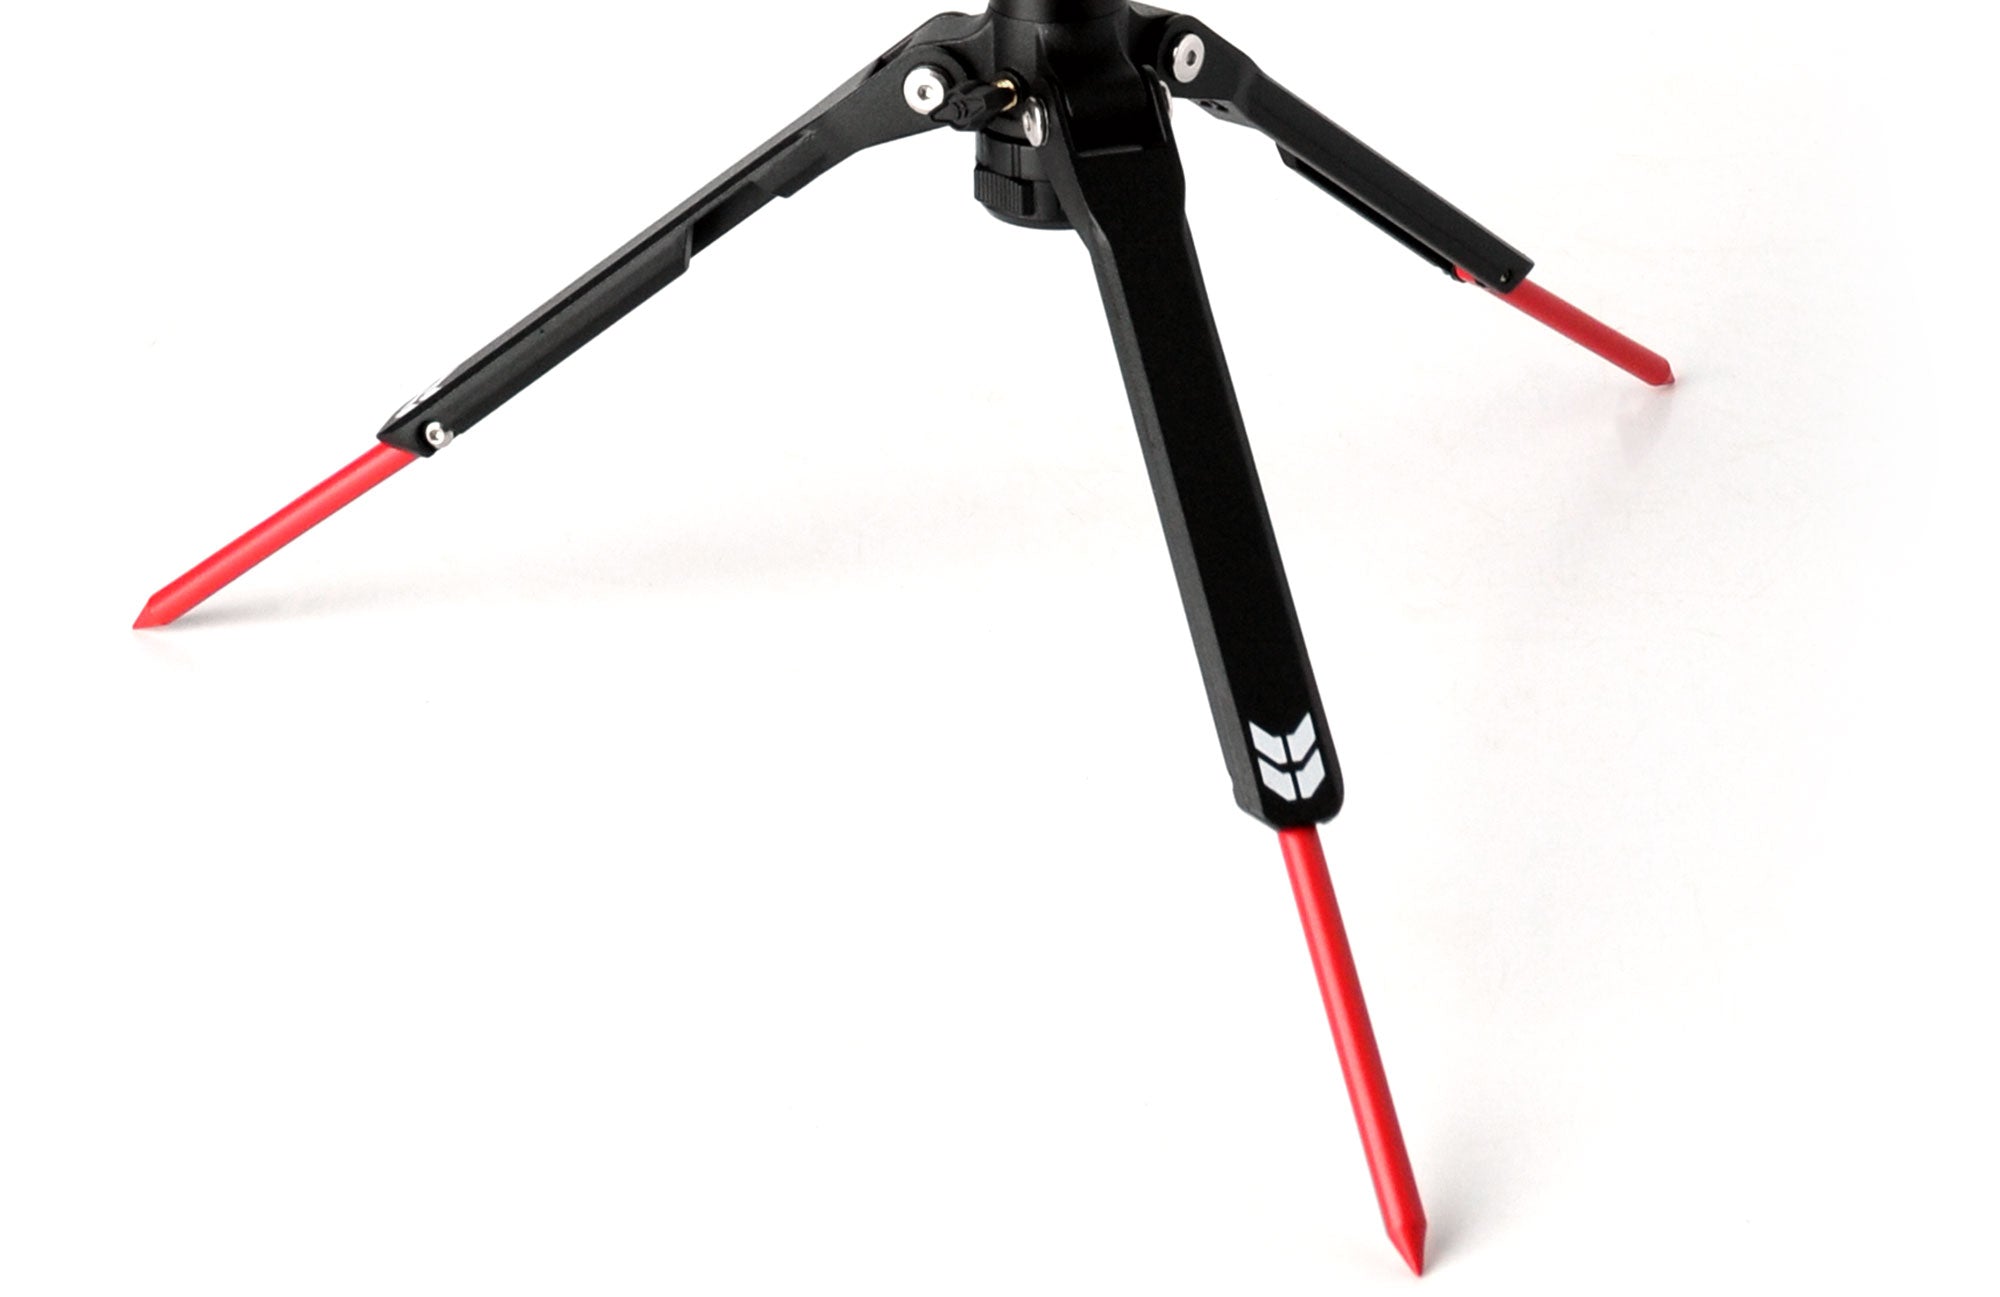 Foldable leg extension and ground spikes | FLi-PRO Telescoping Light by STKR Concepts